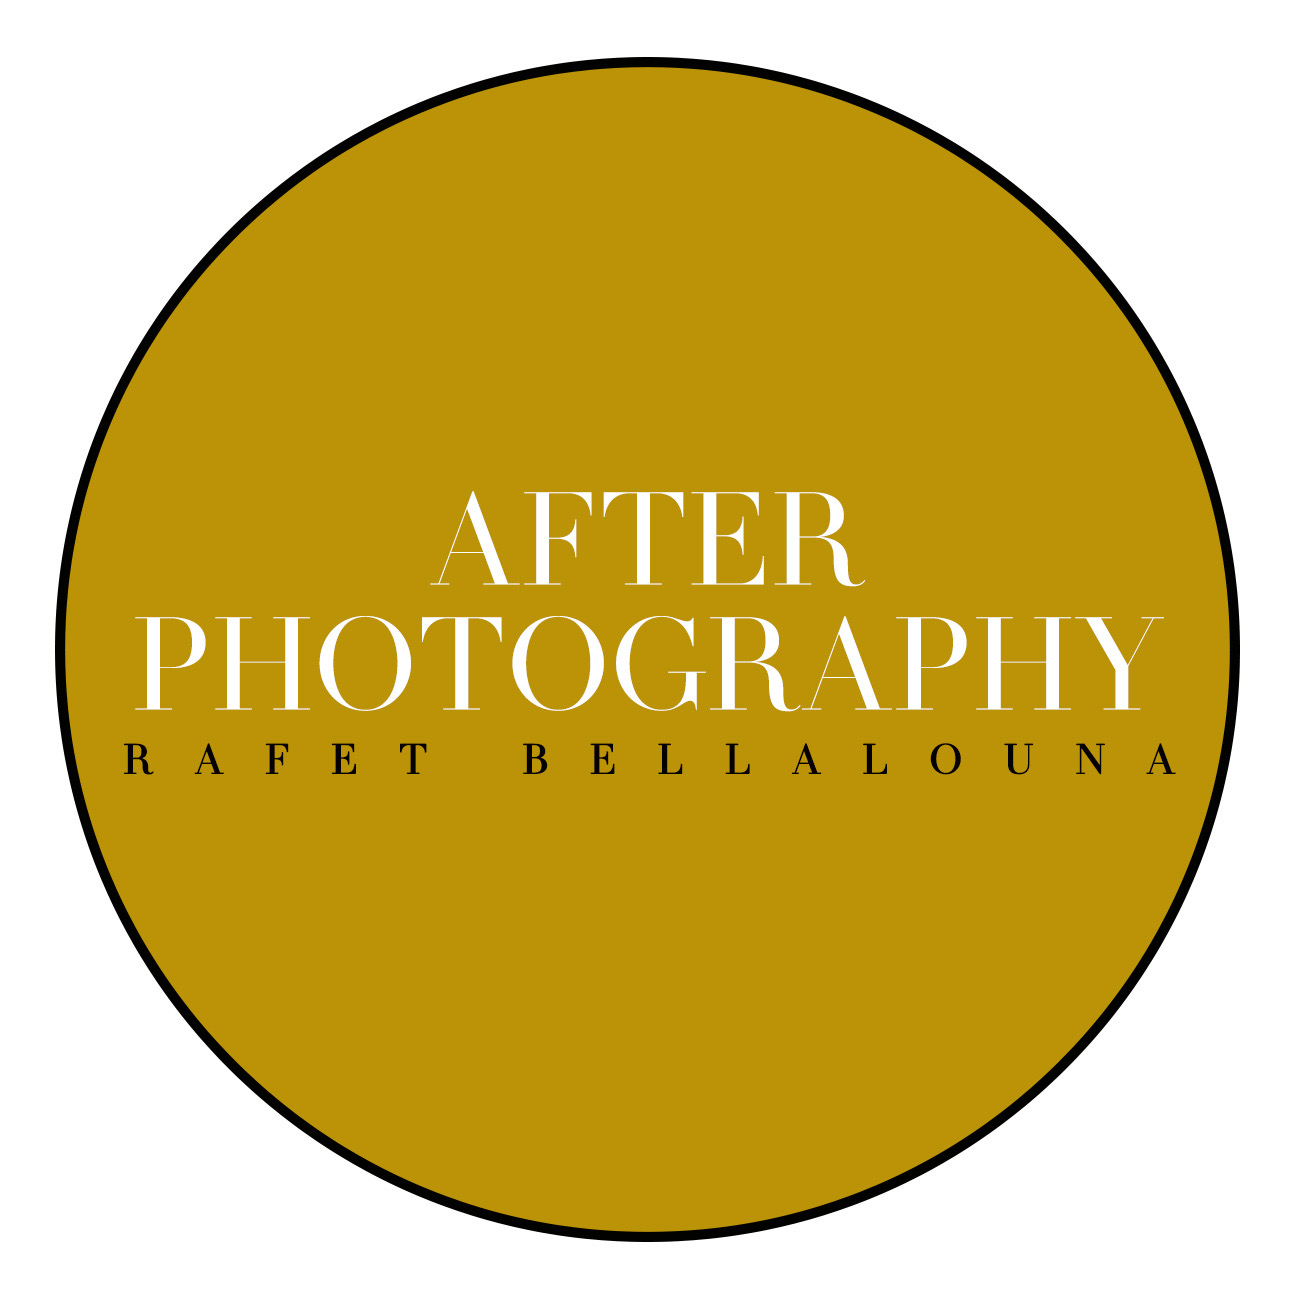 After Photography